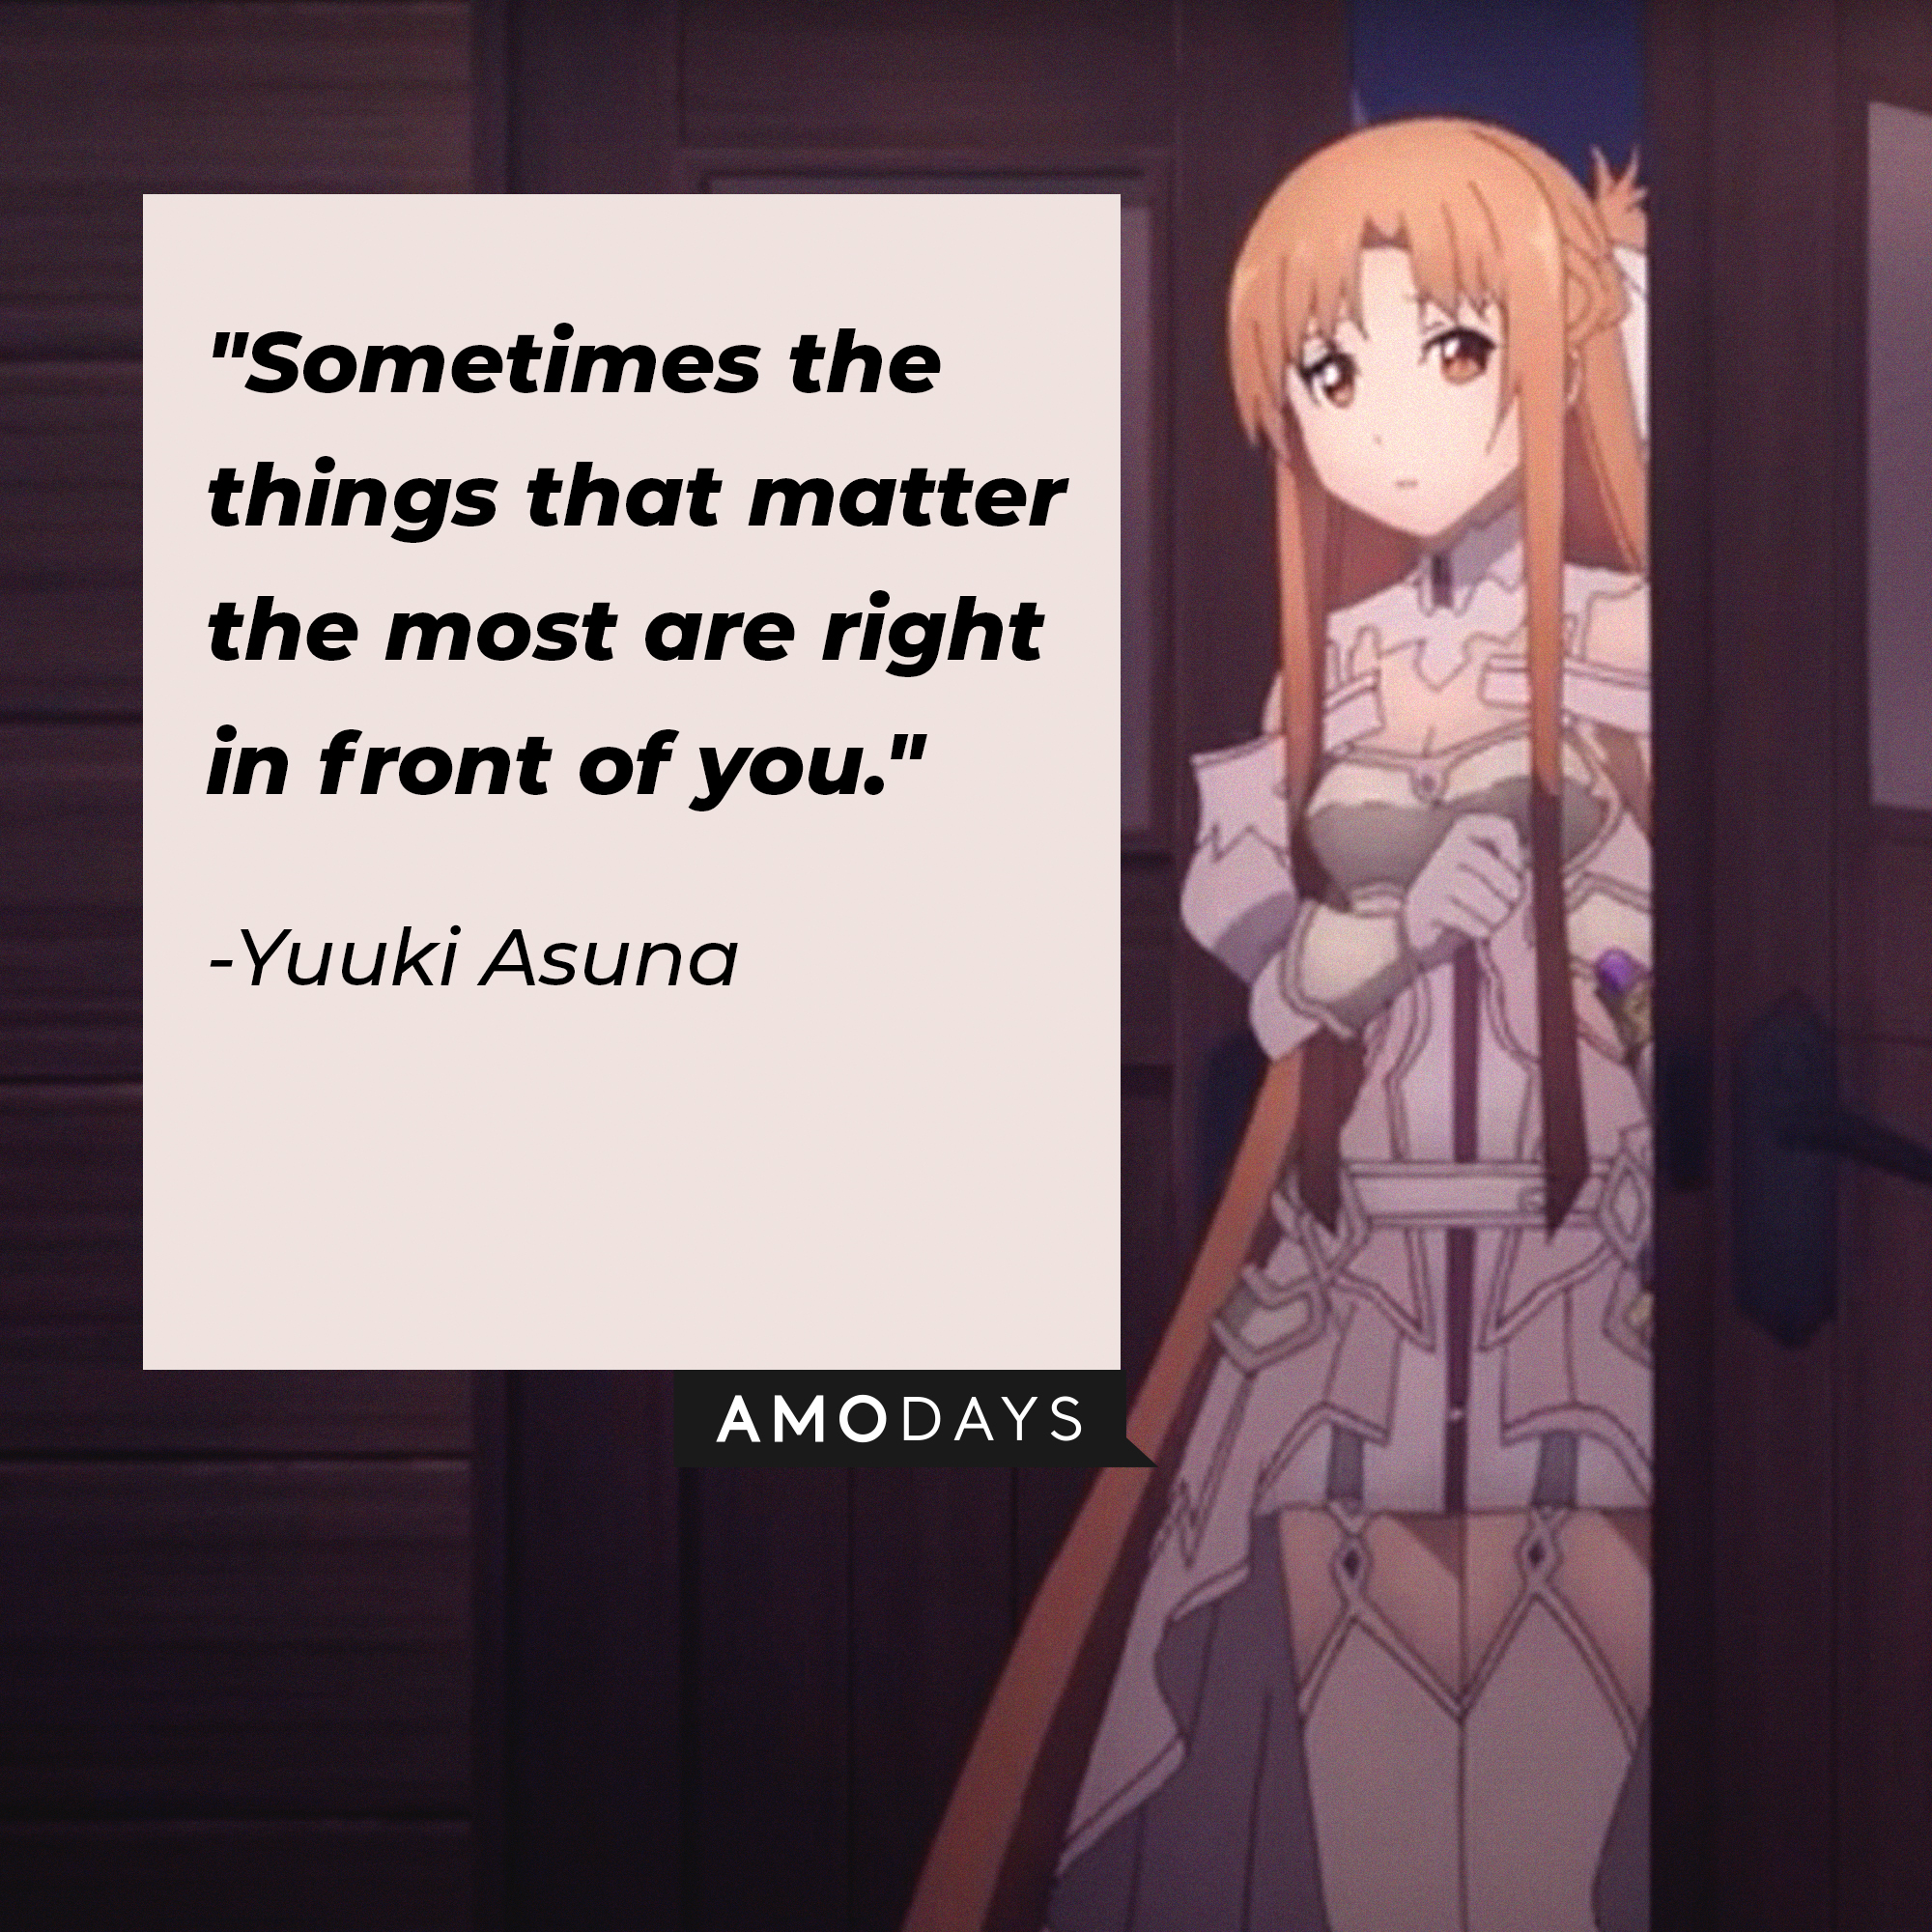 Yuuki Asuna's quote: "Sometimes the things that matter the most are right in front of you." | Source: Facebook.com/SwordArtOnlineUSA